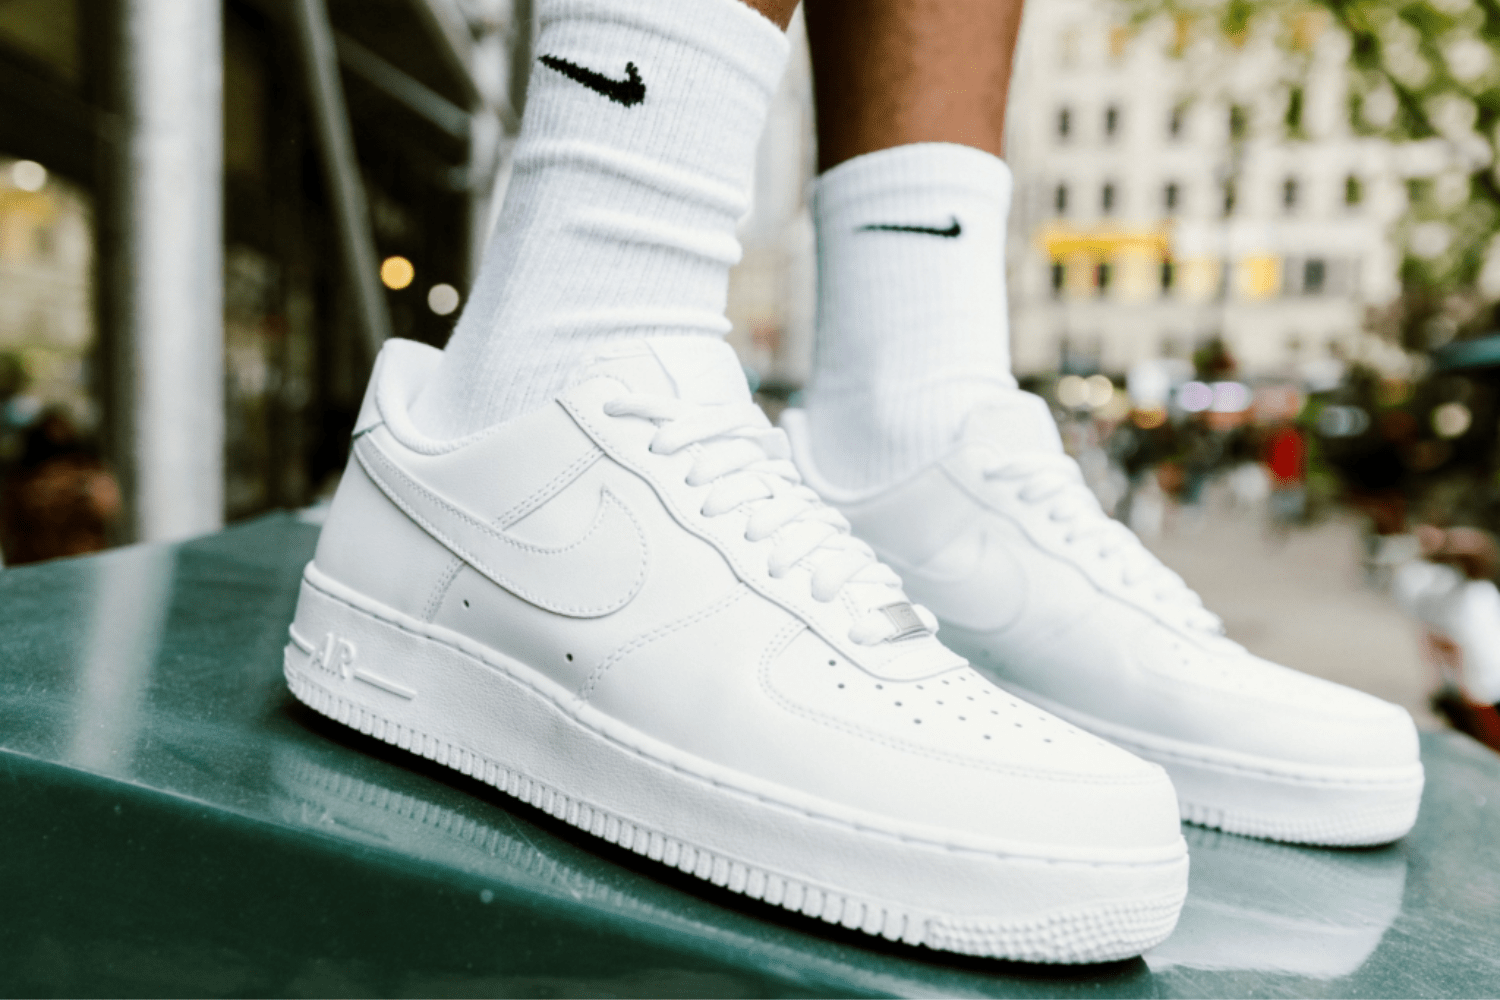 Our favourite white sneakers at Foot Locker